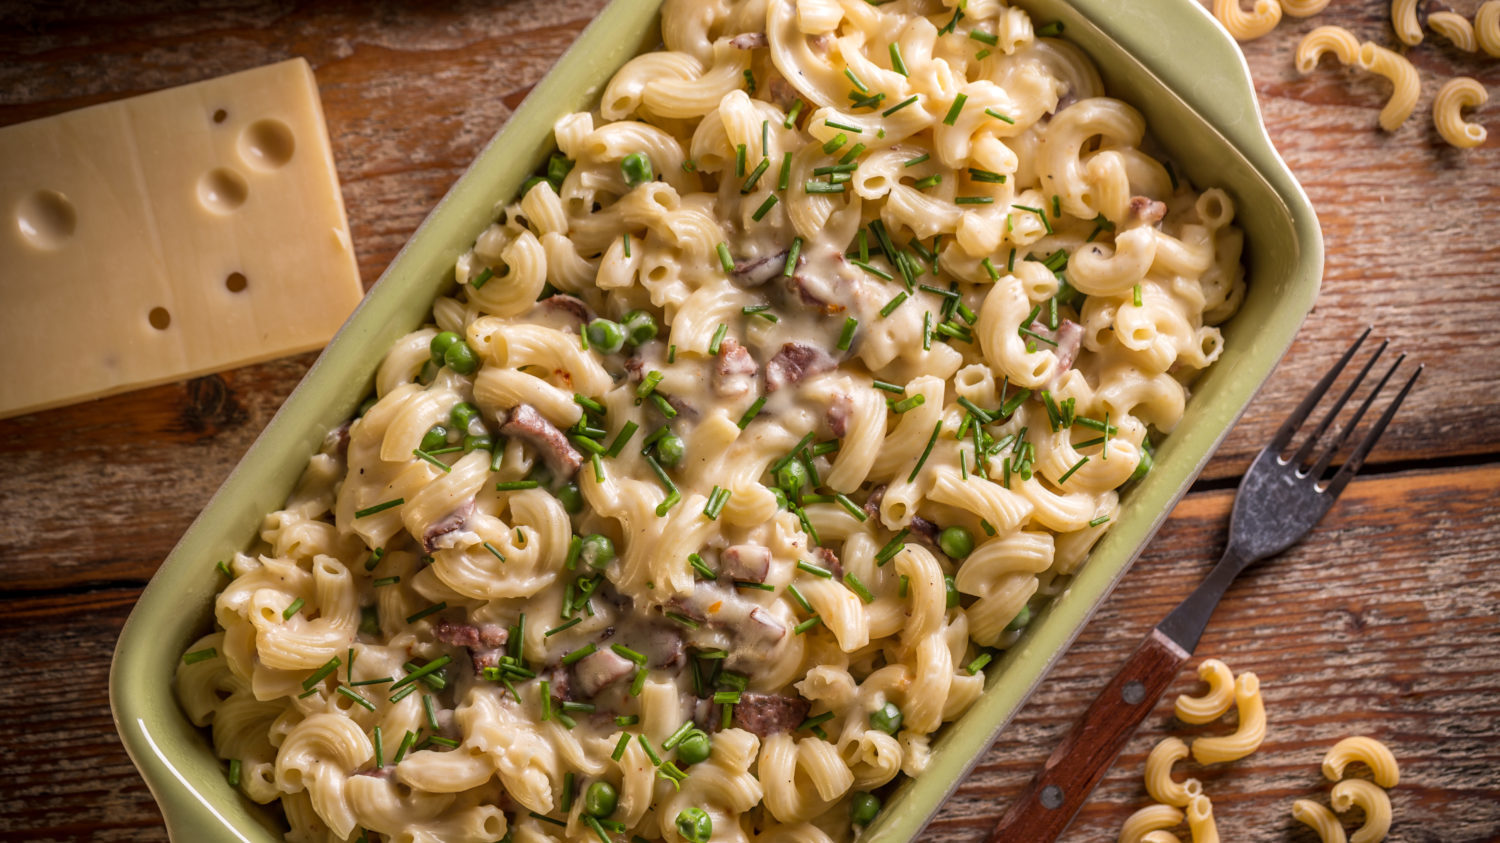 Image for Budget Cooking: Mac & Cheese <br>with Tuna & Peas